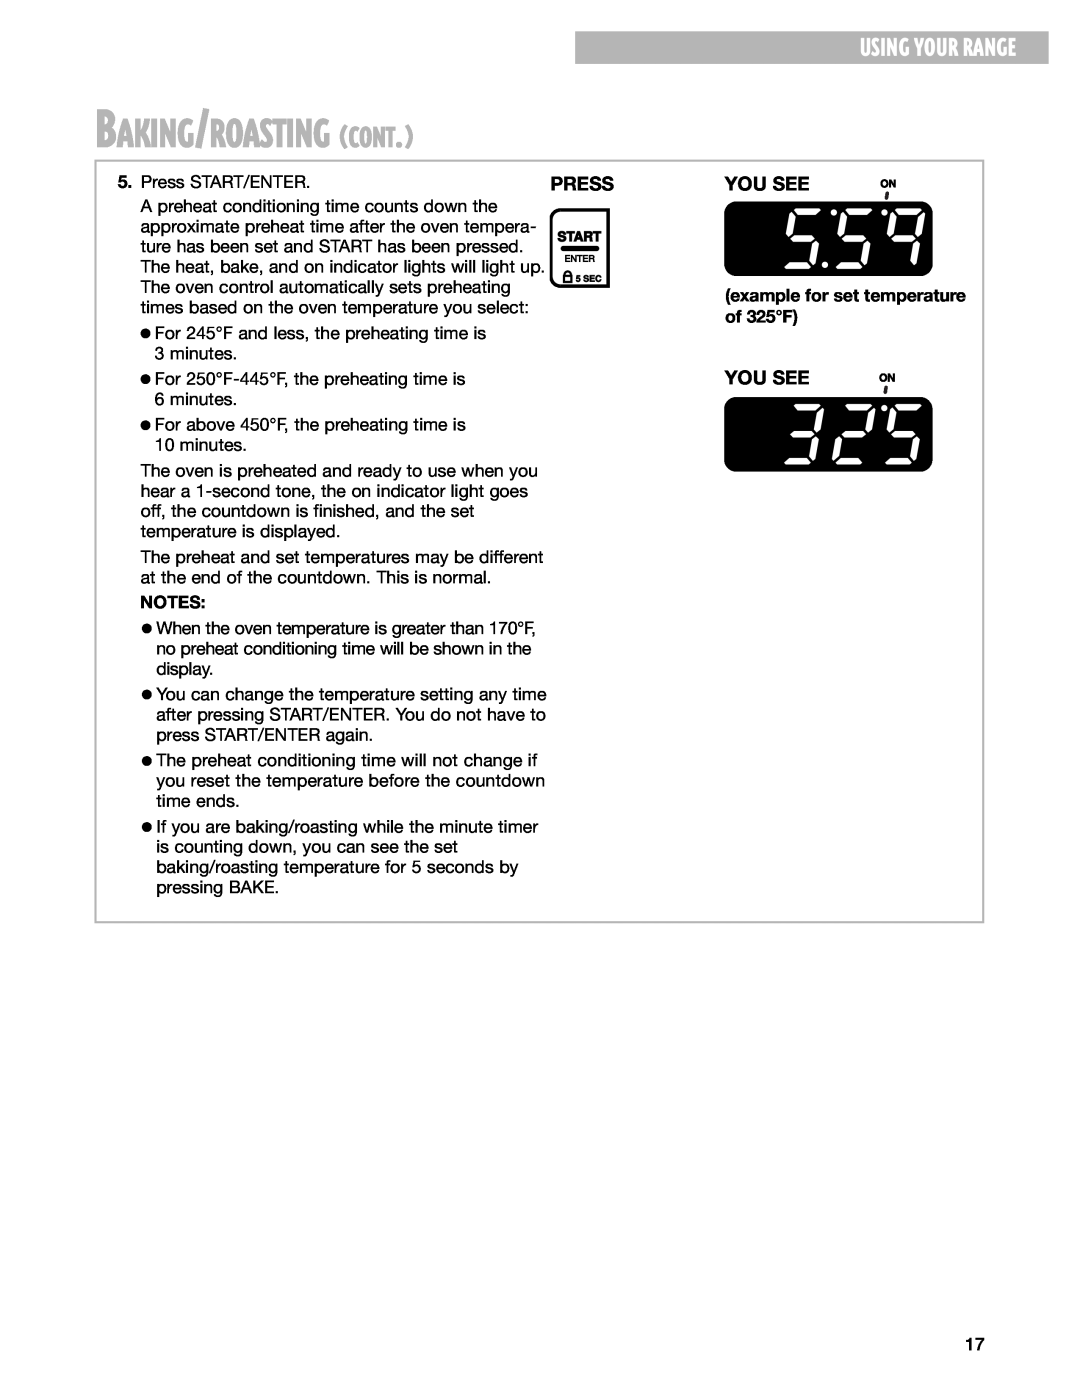 Whirlpool SES374H warranty Baking/Roasting Cont, Using Your Range, Press, You See, example for set temperature of 325F 